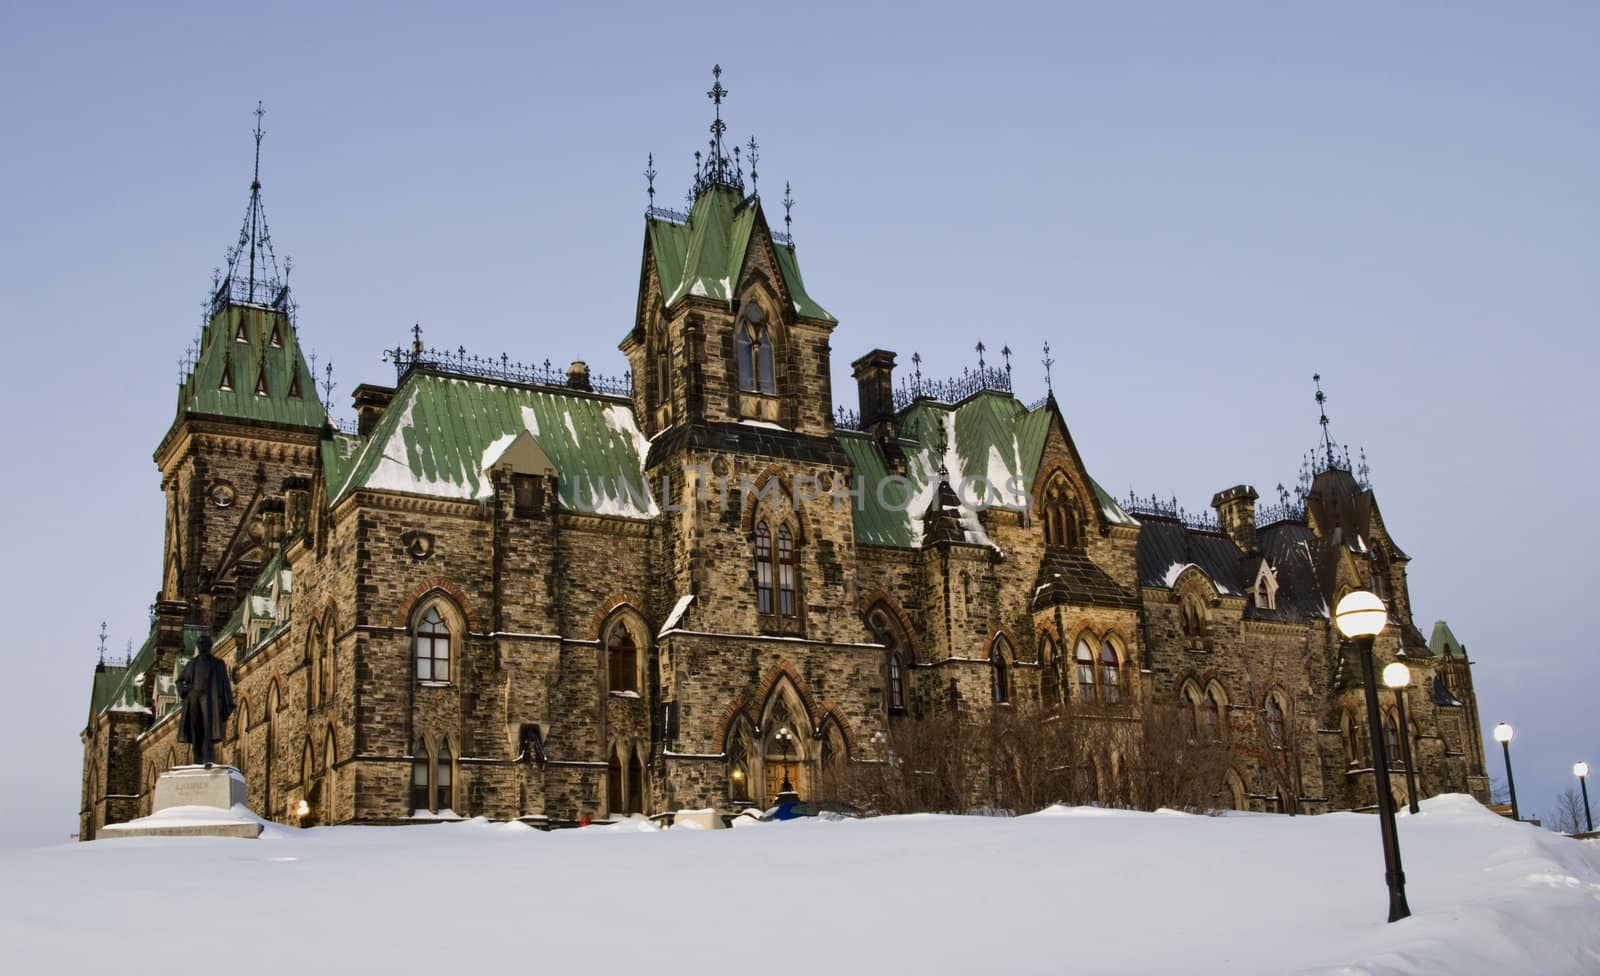 The canadian Parliament East block during the winter season.